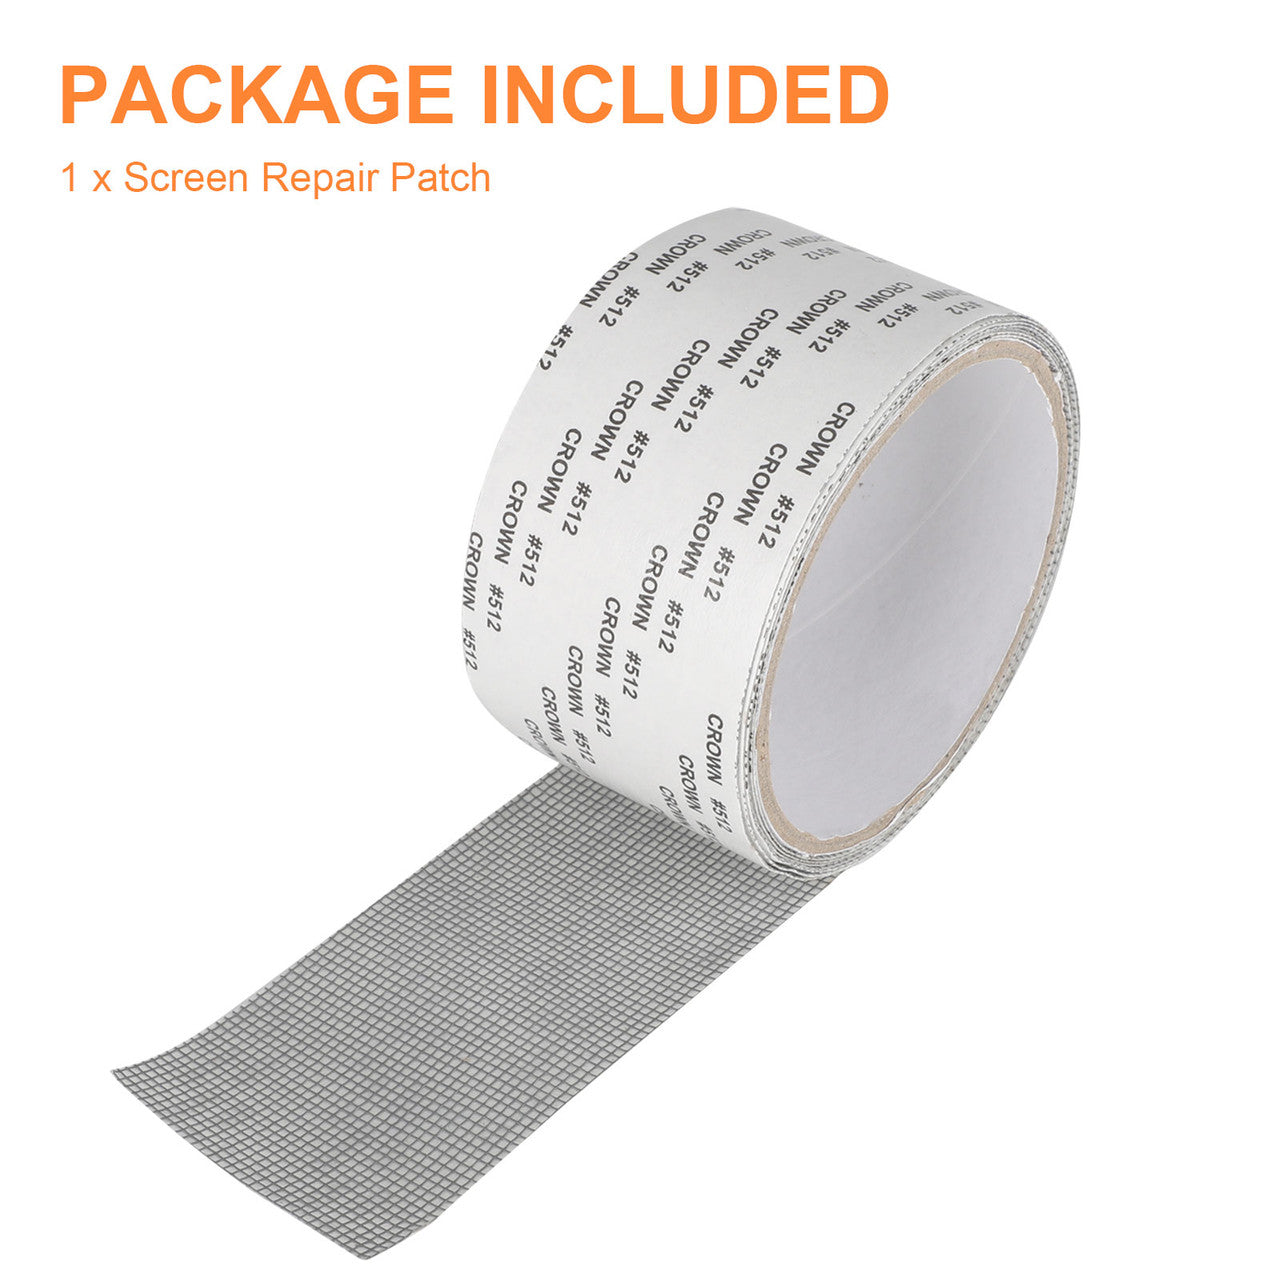 Window Screen Patch Repair Kit Tape, Strong Adhesive Long Lasting Fiberglass Covering Wire Mesh Screen Repair kit, Repair Tape Seal for Screen of Window and Door tears Holes (2 x 78.7 Inches, Grey)